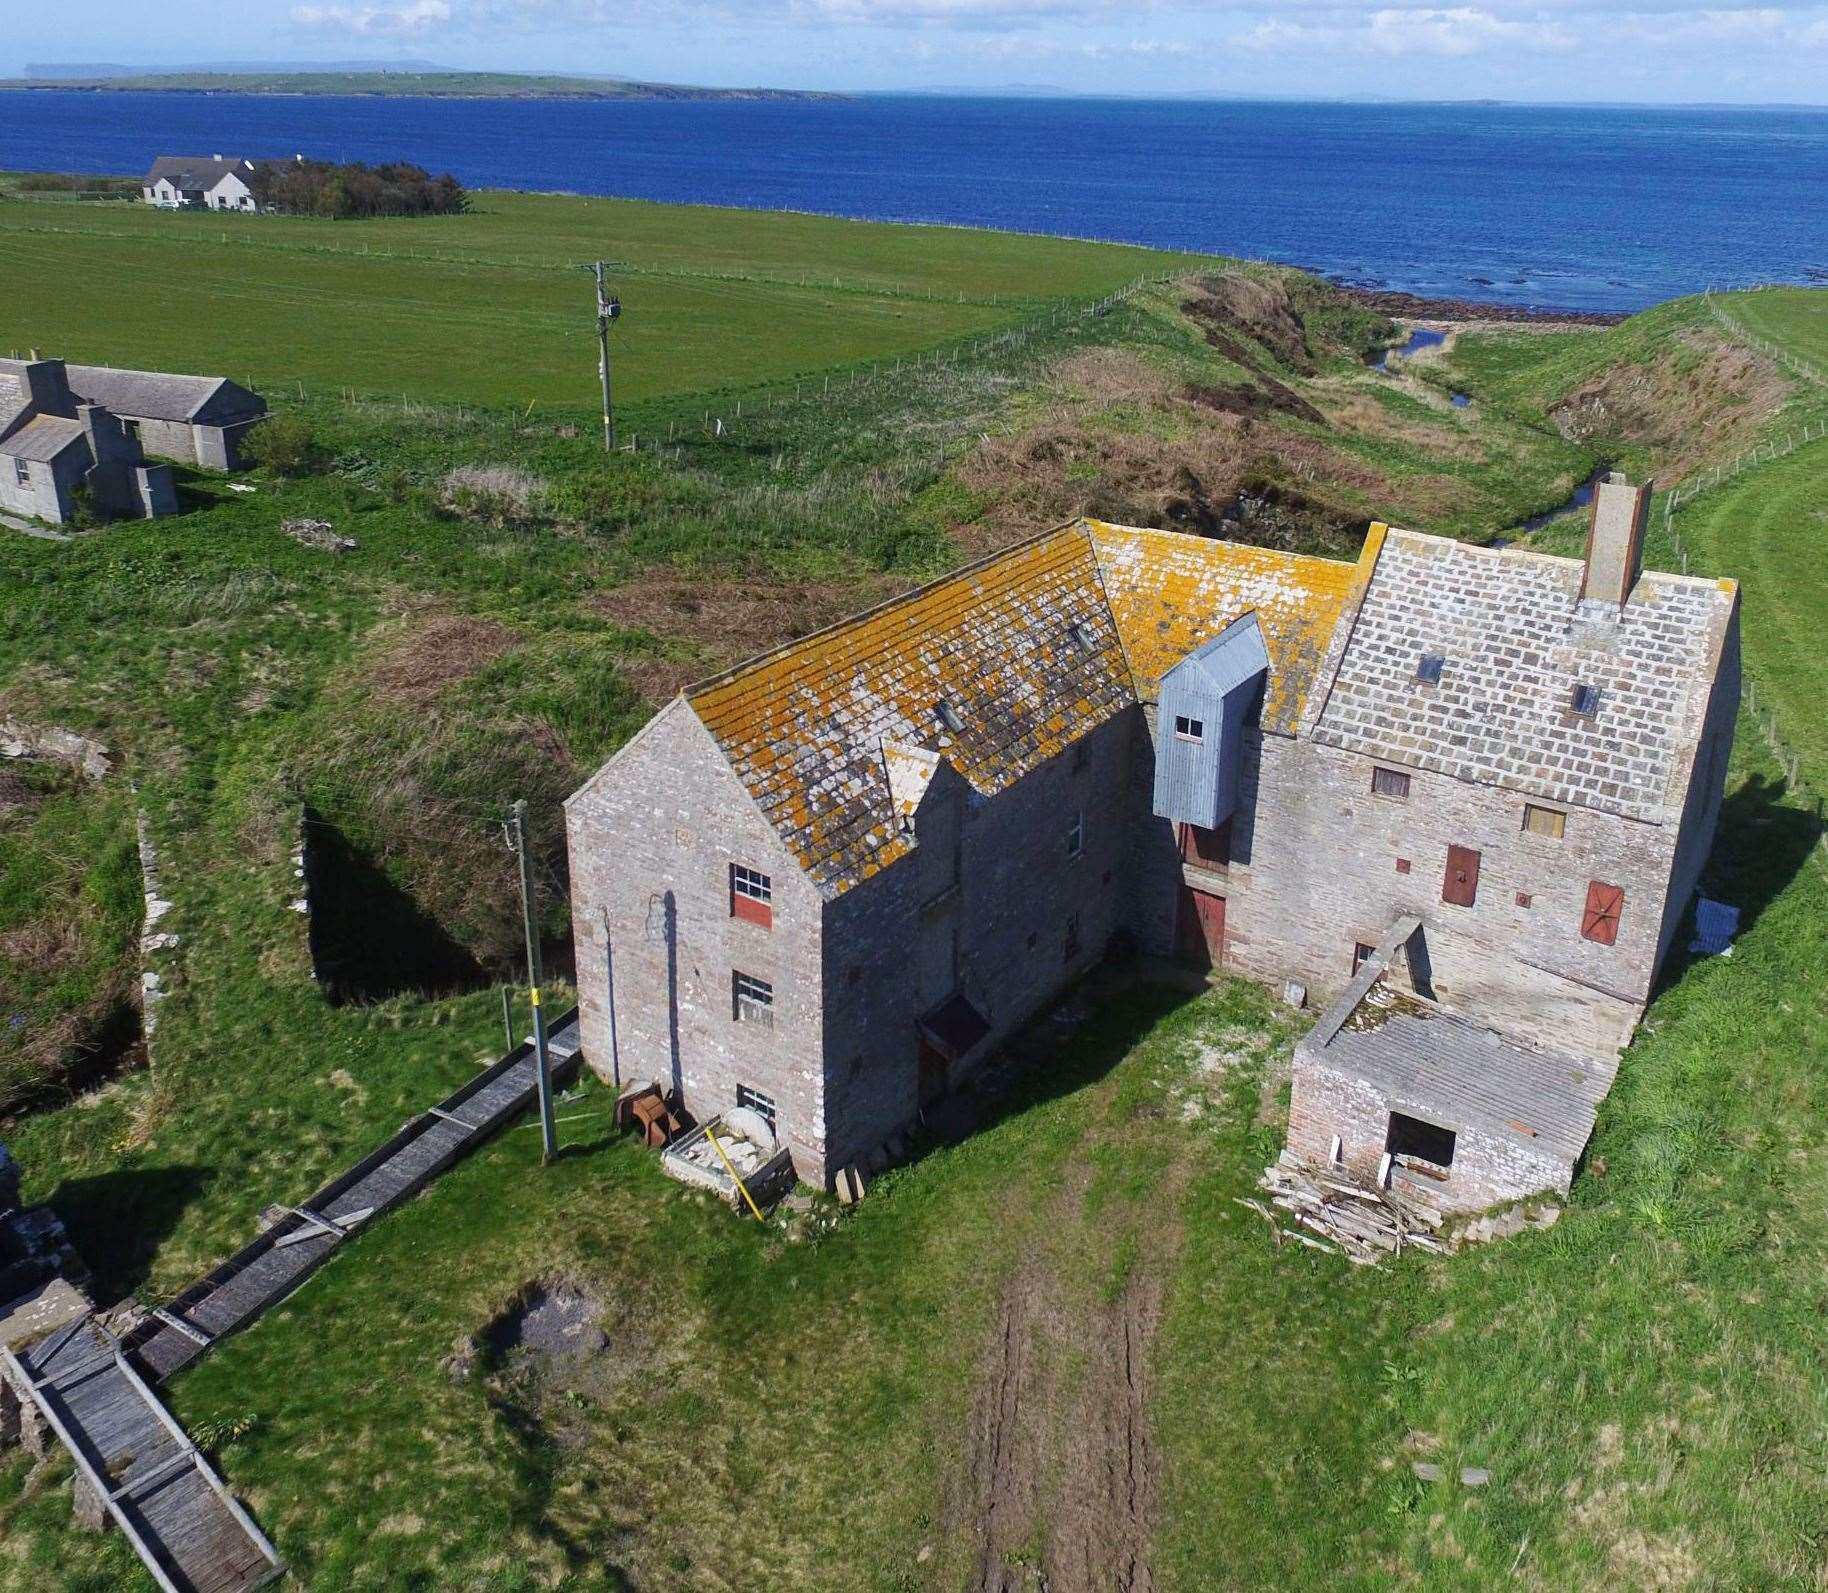 A request by John O'Groats Mill Trust for £1000 for a community and cultural hub was successful.